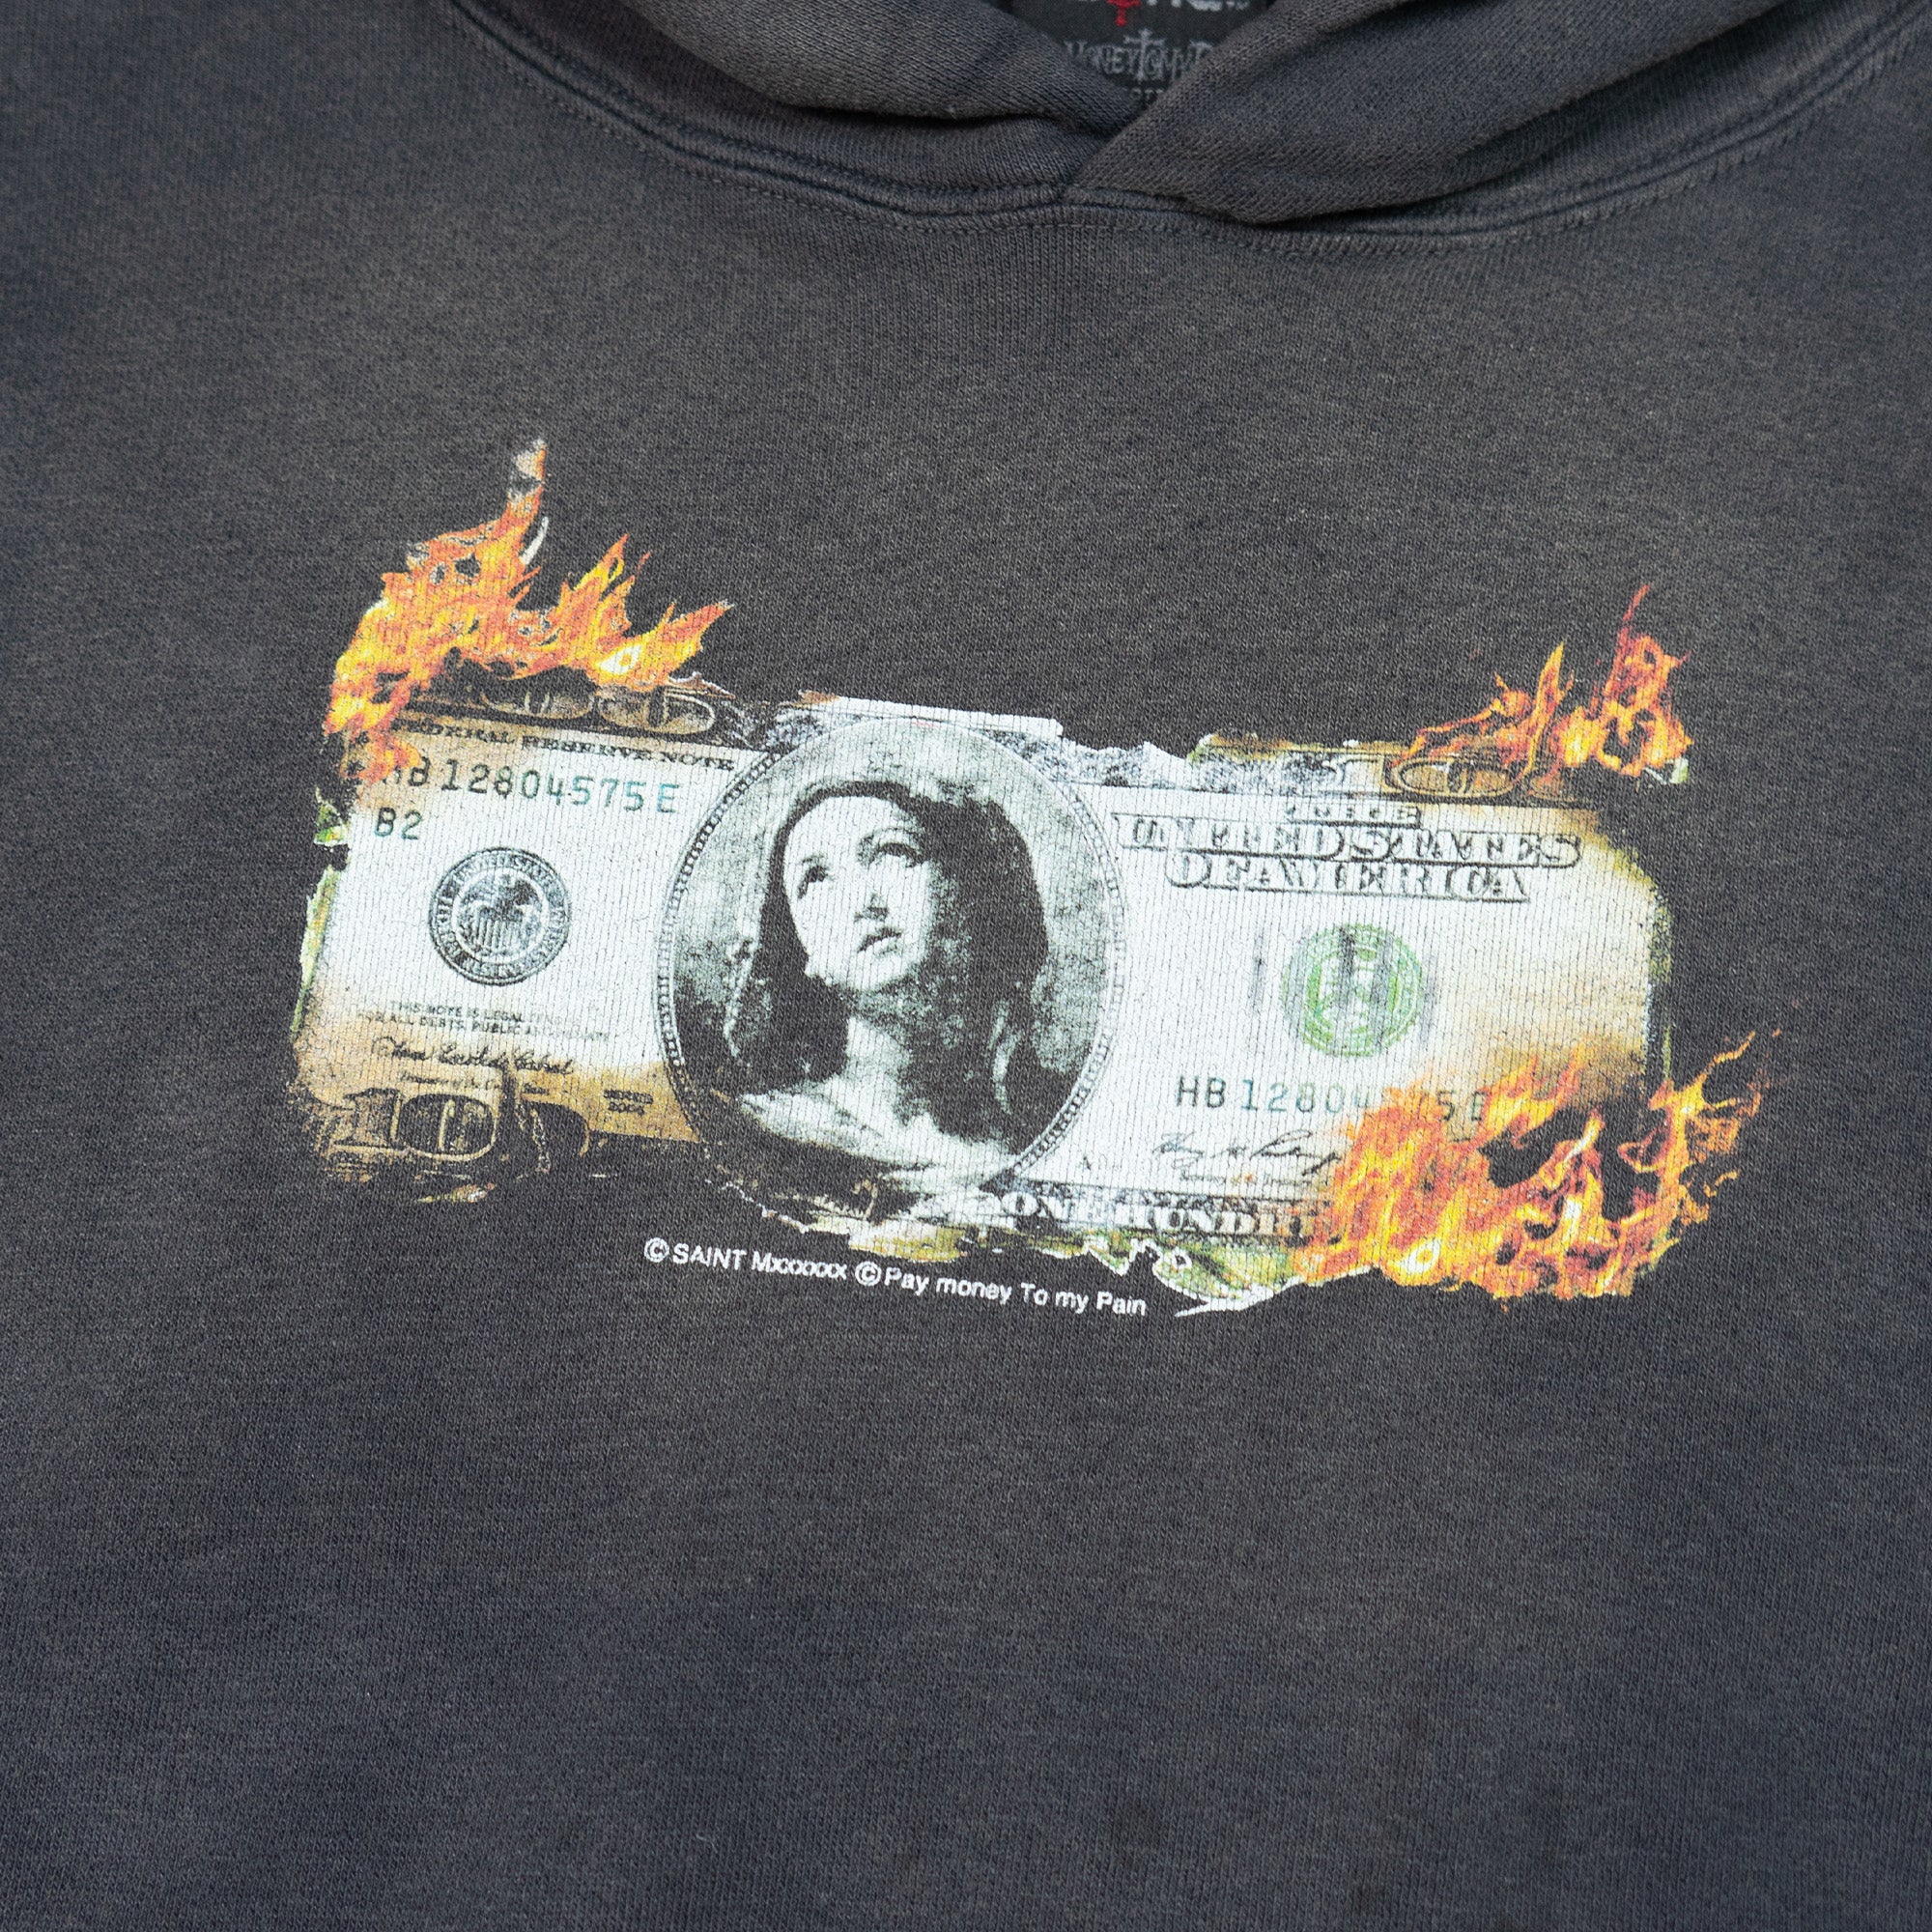 PAY MONEY TO MY PAIN DISTRESSED HOODIE